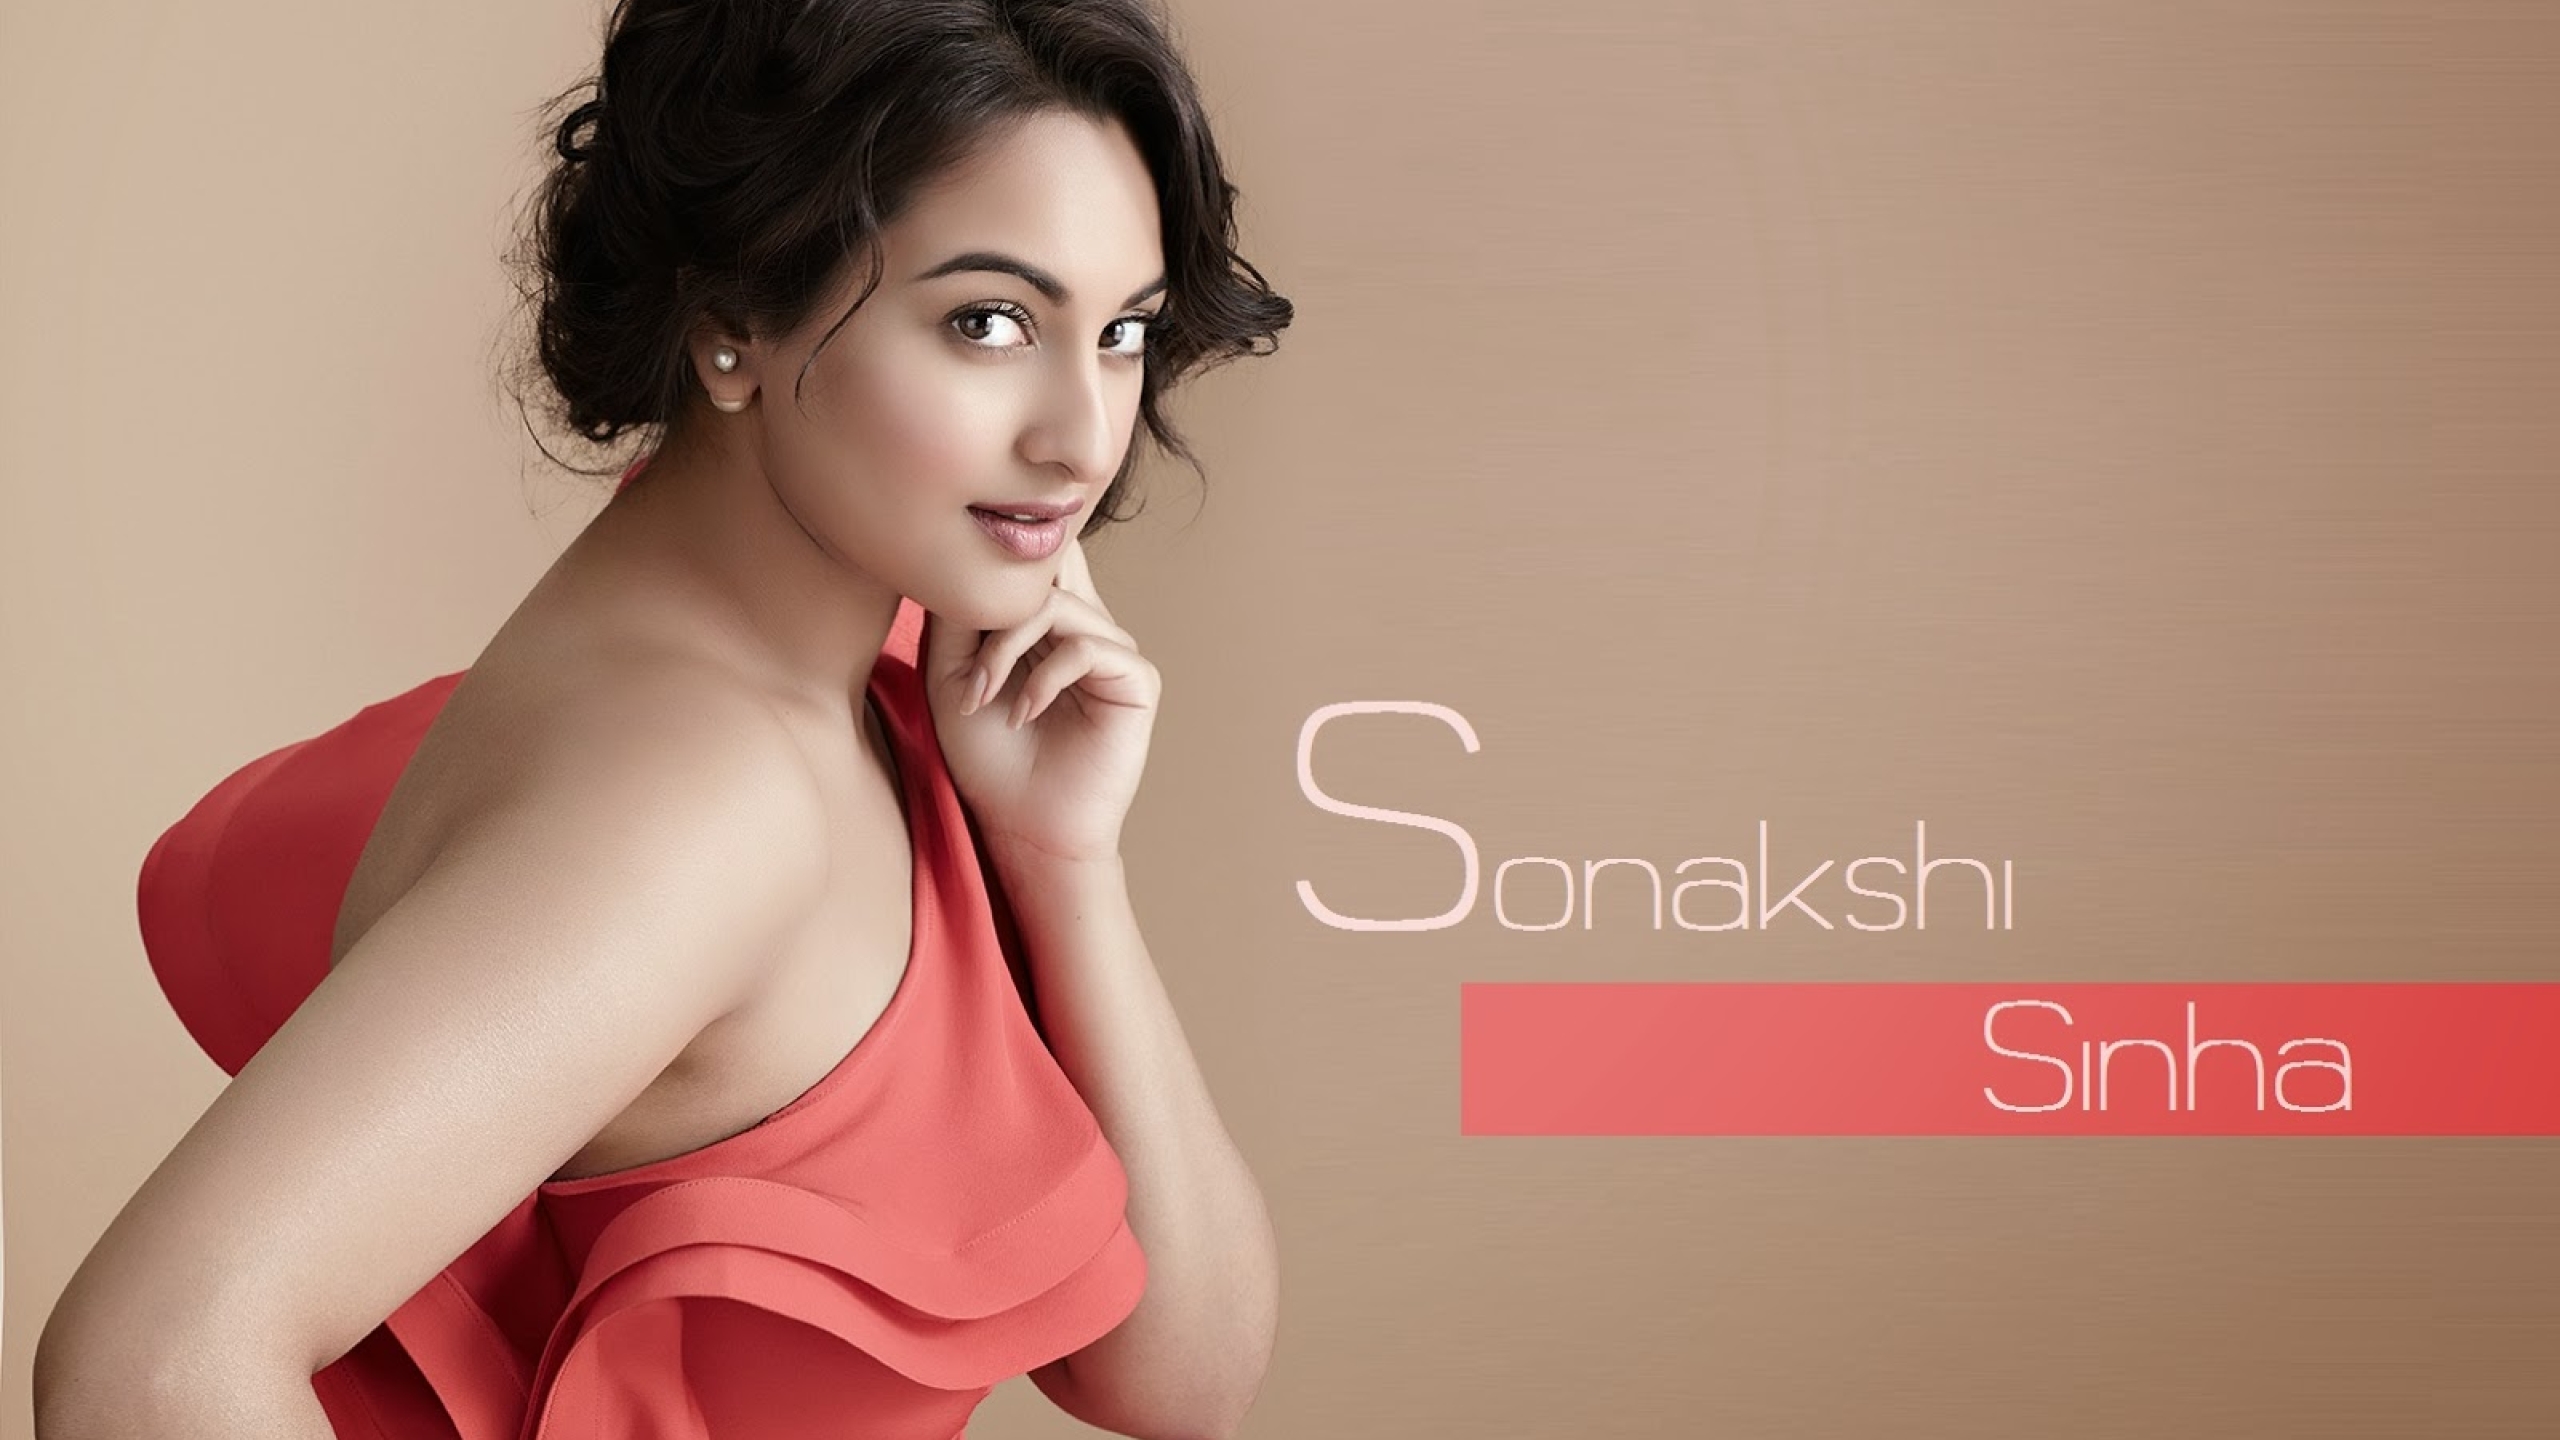 2560x1440 Resolution Sonakshi Sinha Lovely Wallpapers 1440p Resolution Wallpaper Wallpapers Den